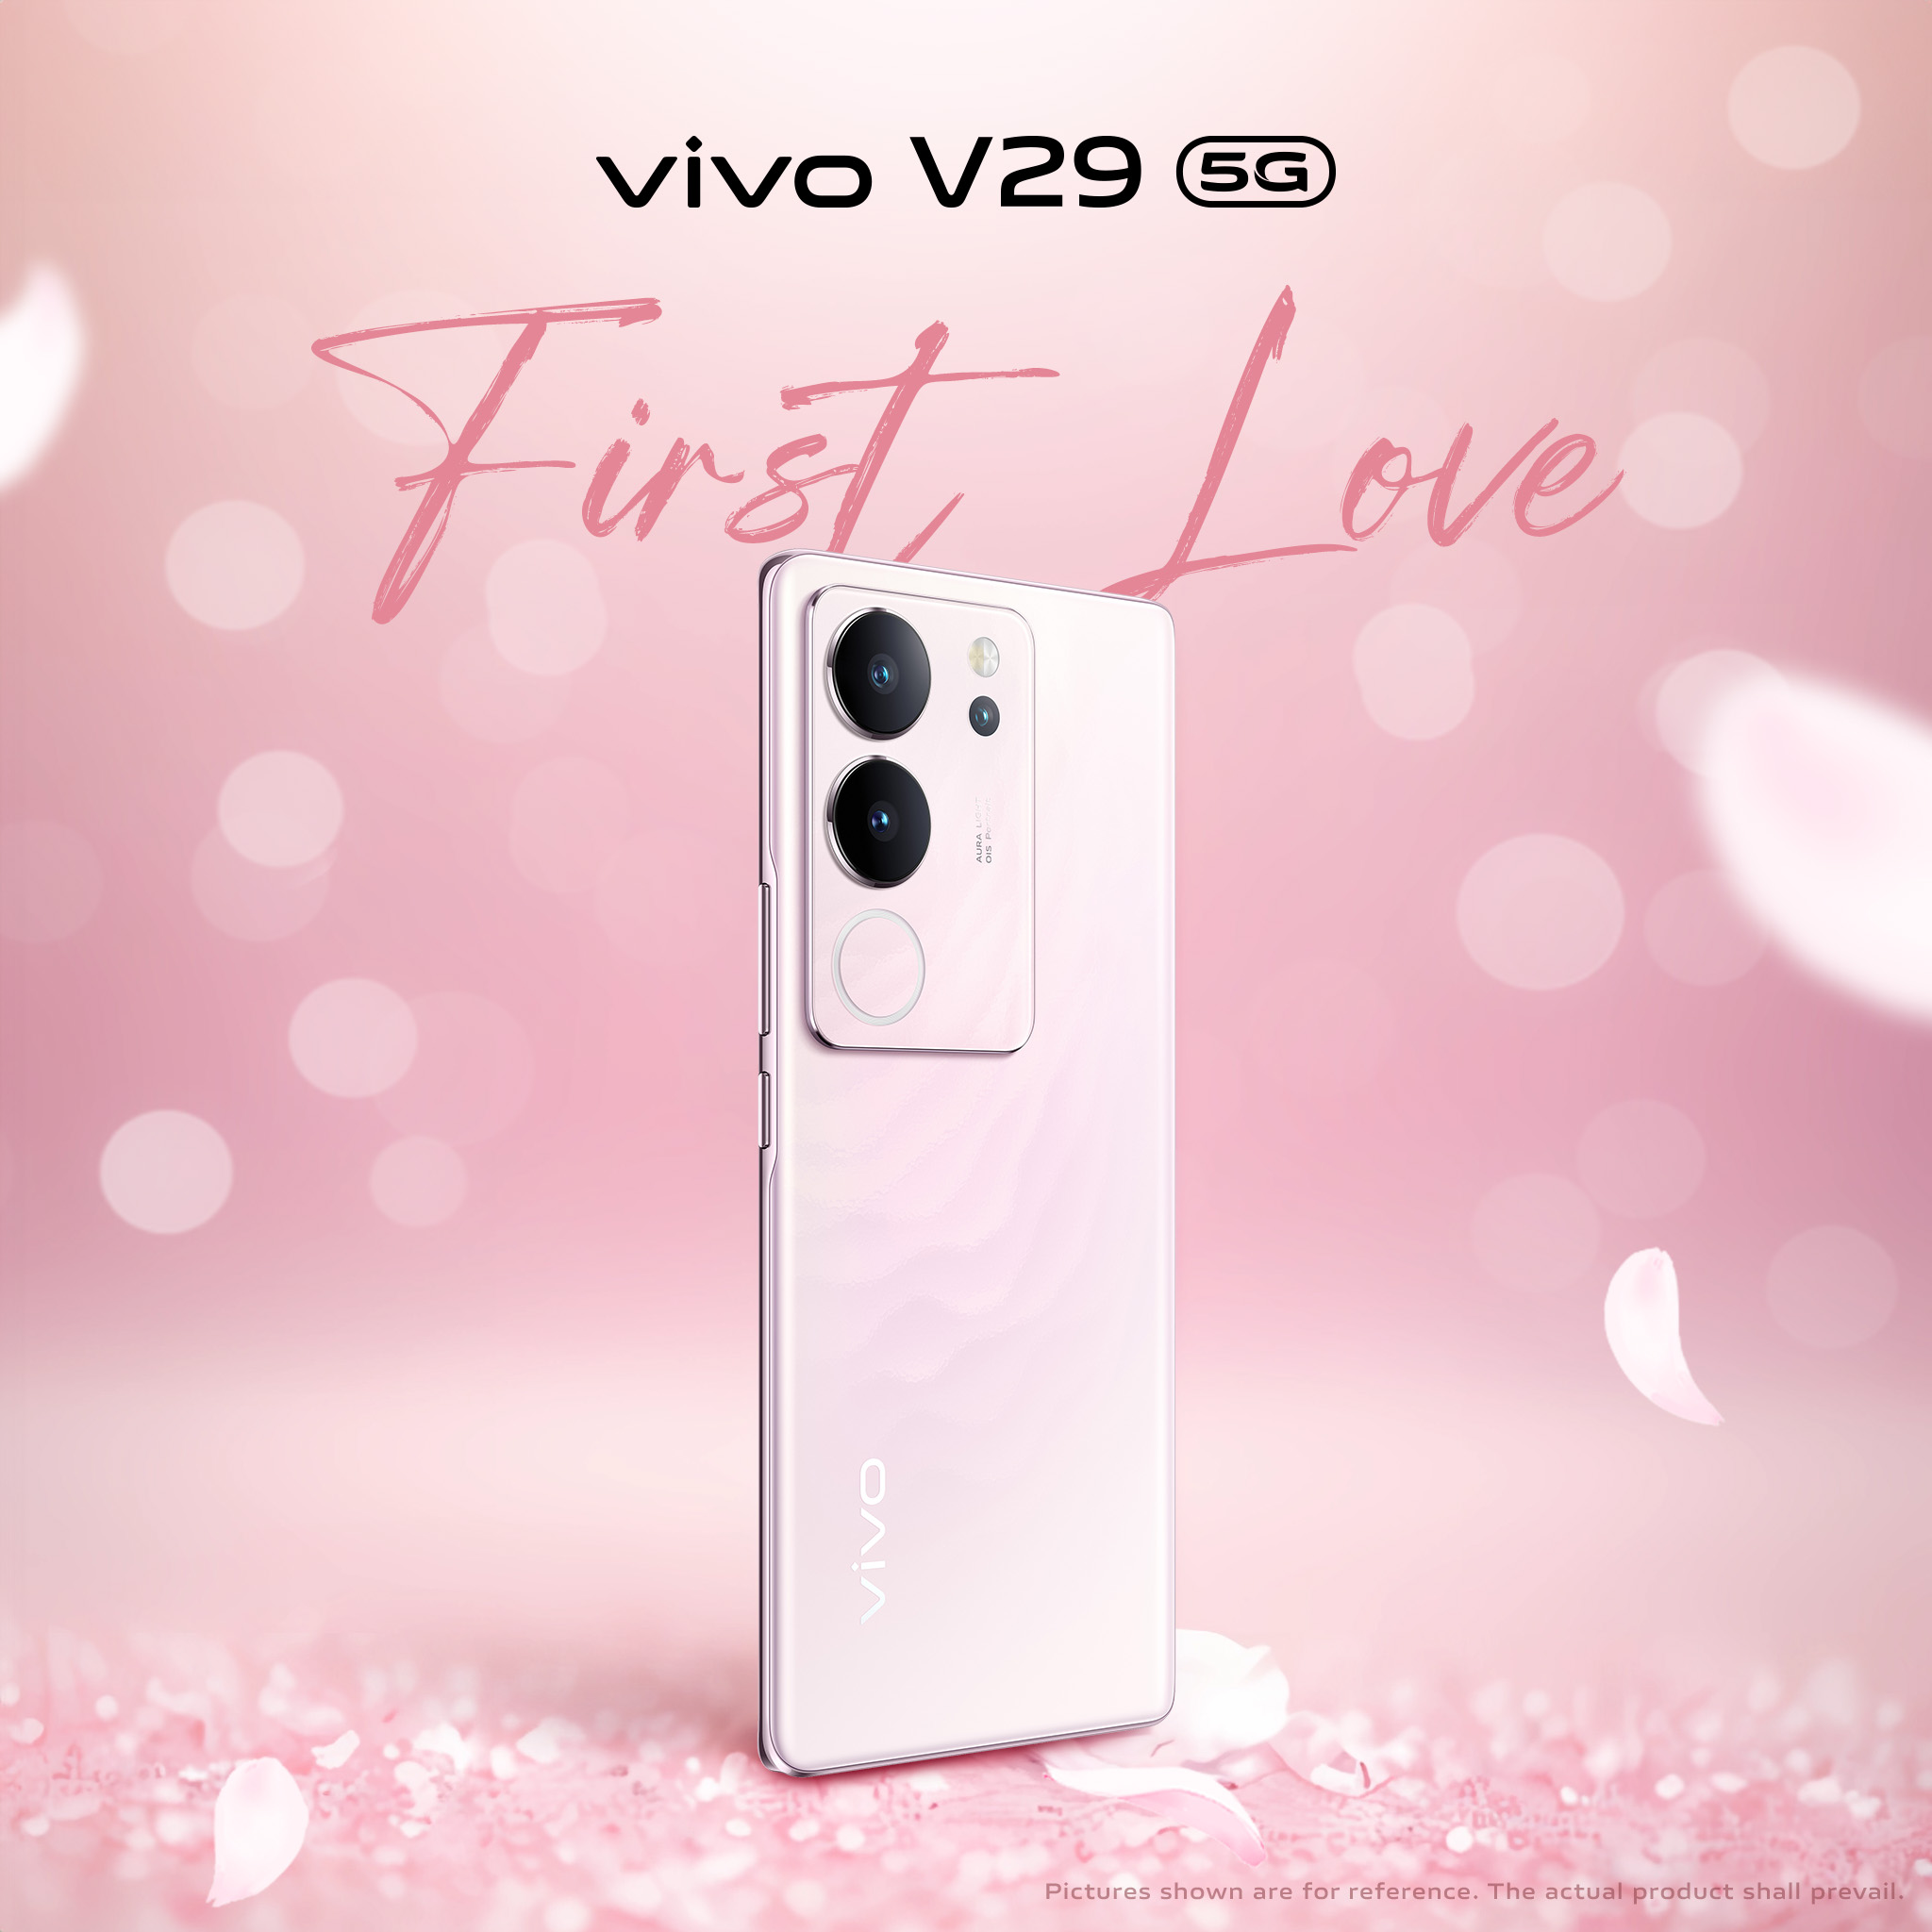 First love is always the best? Vivo v29 5g is proving you right | weirdkaya